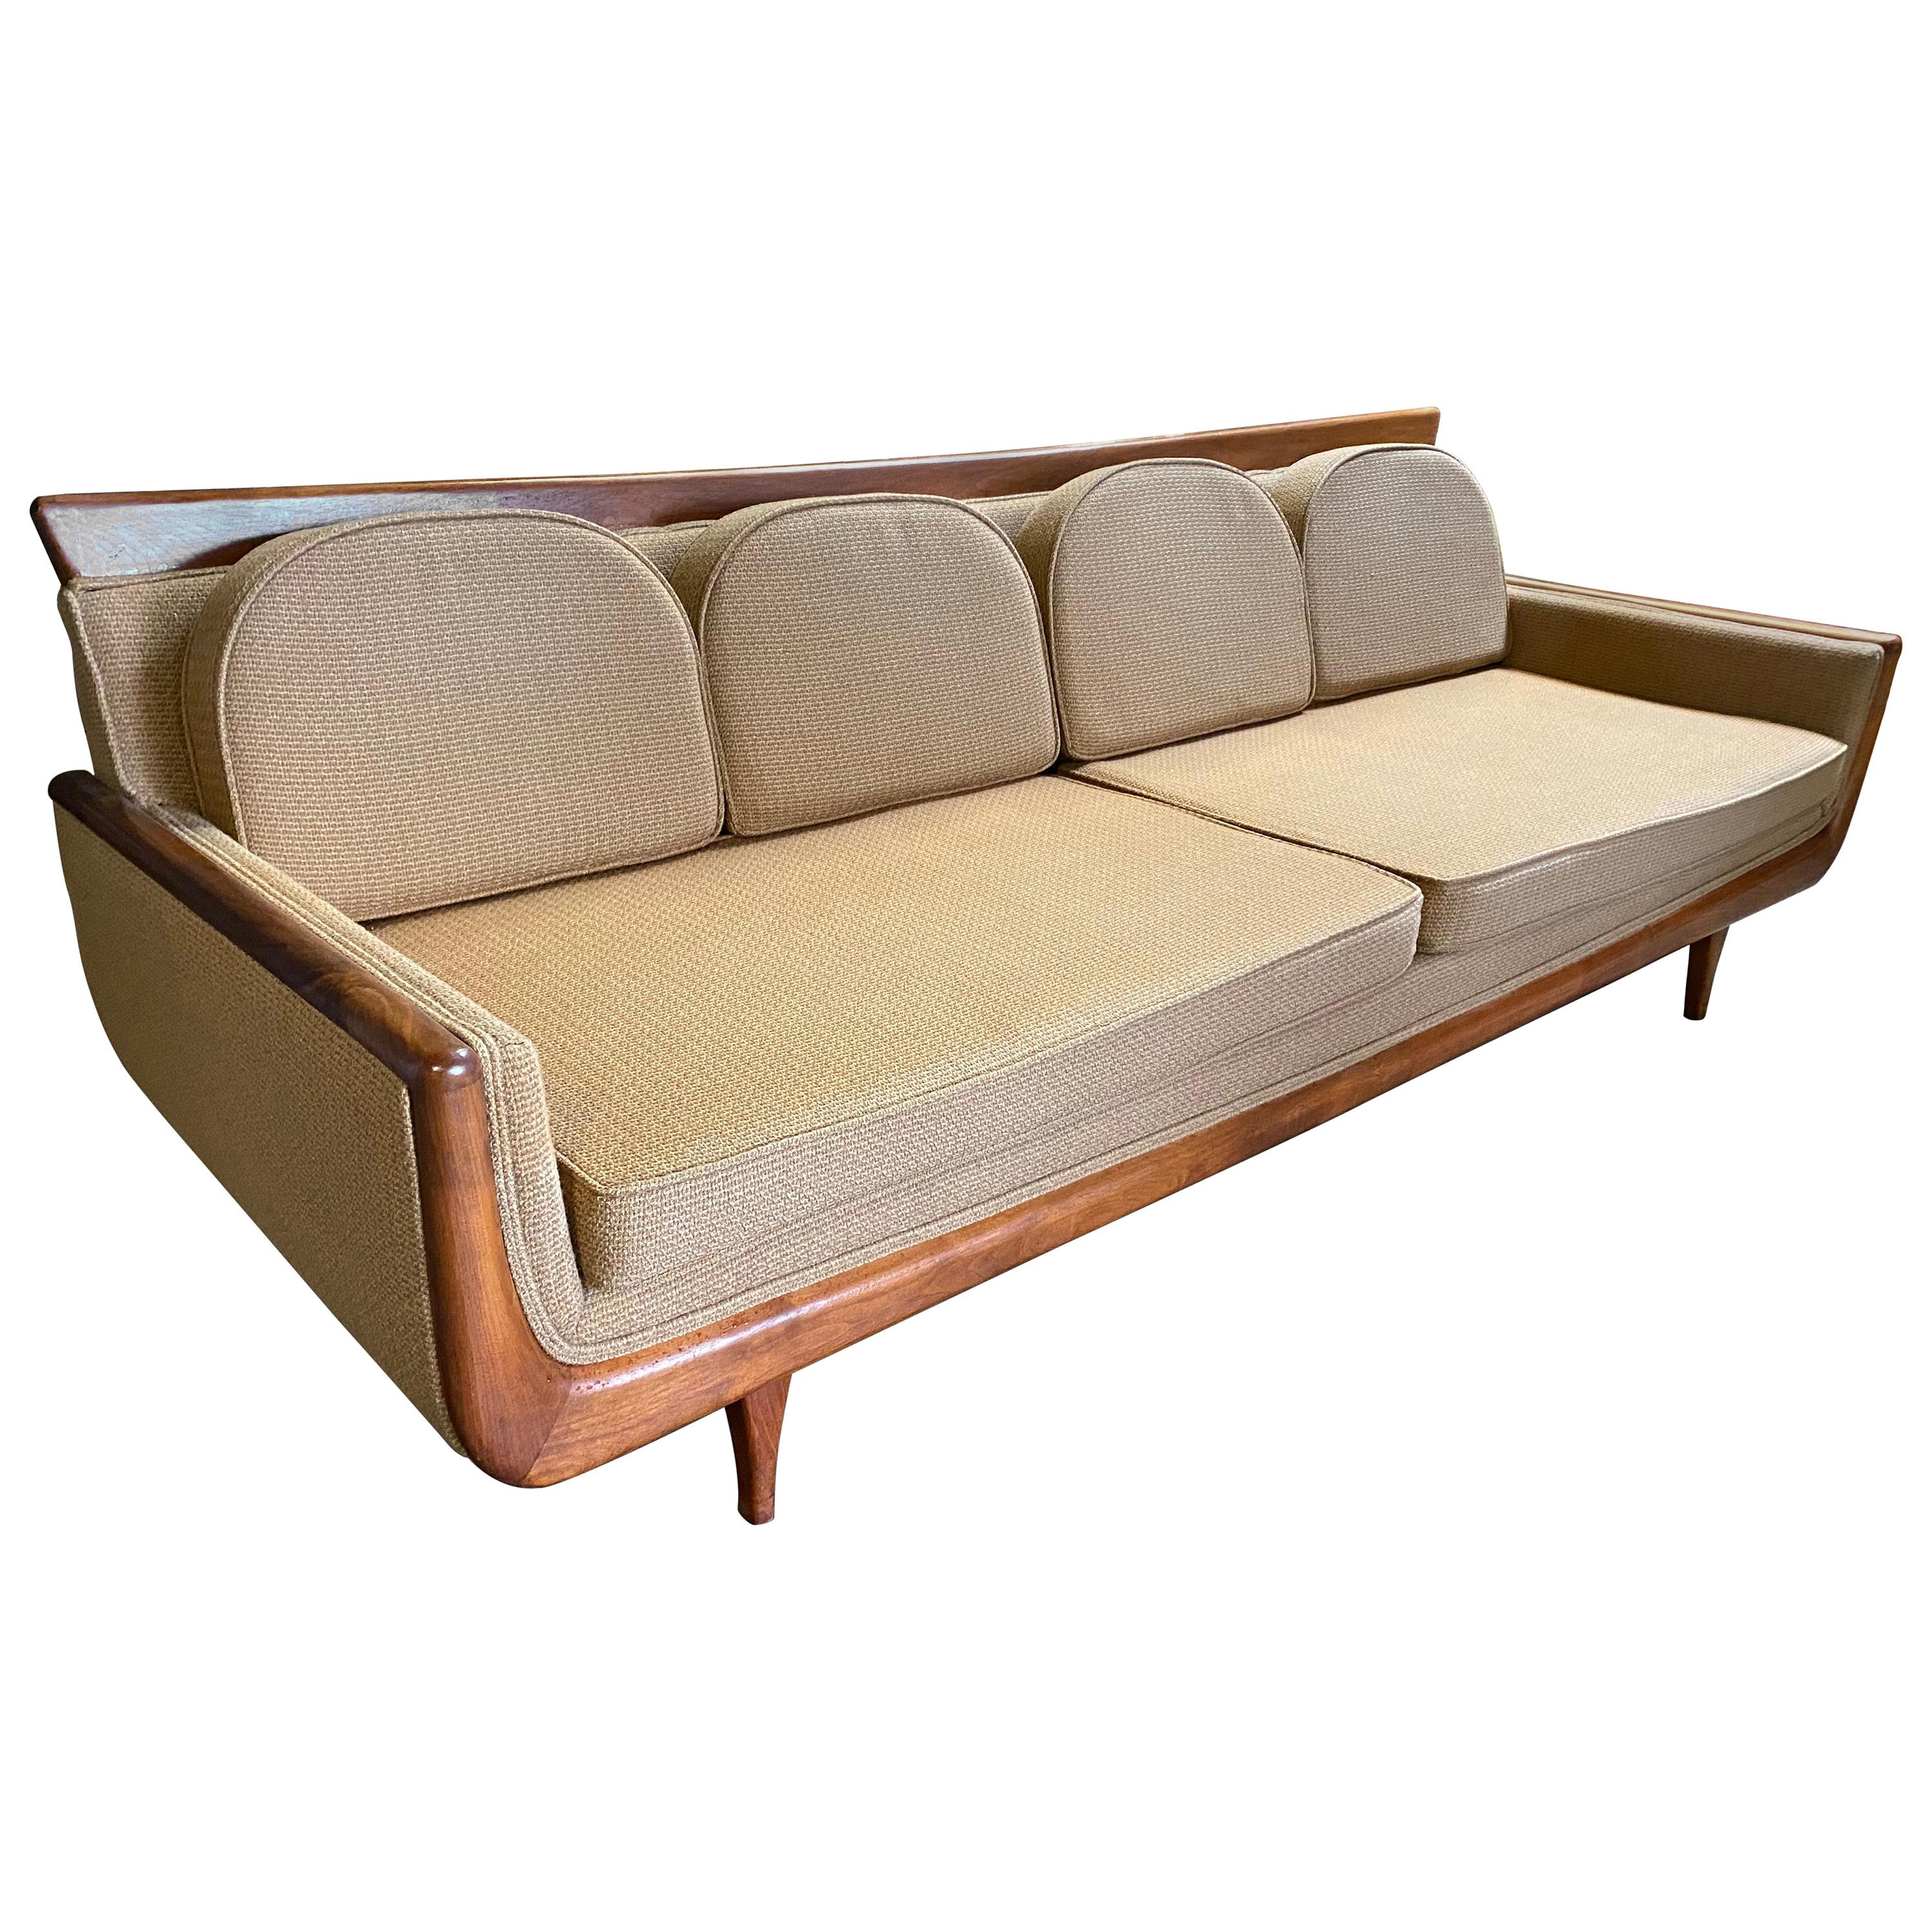 Handsome Mid-Century Modern Sofa, Manner of Adrian Pearsall